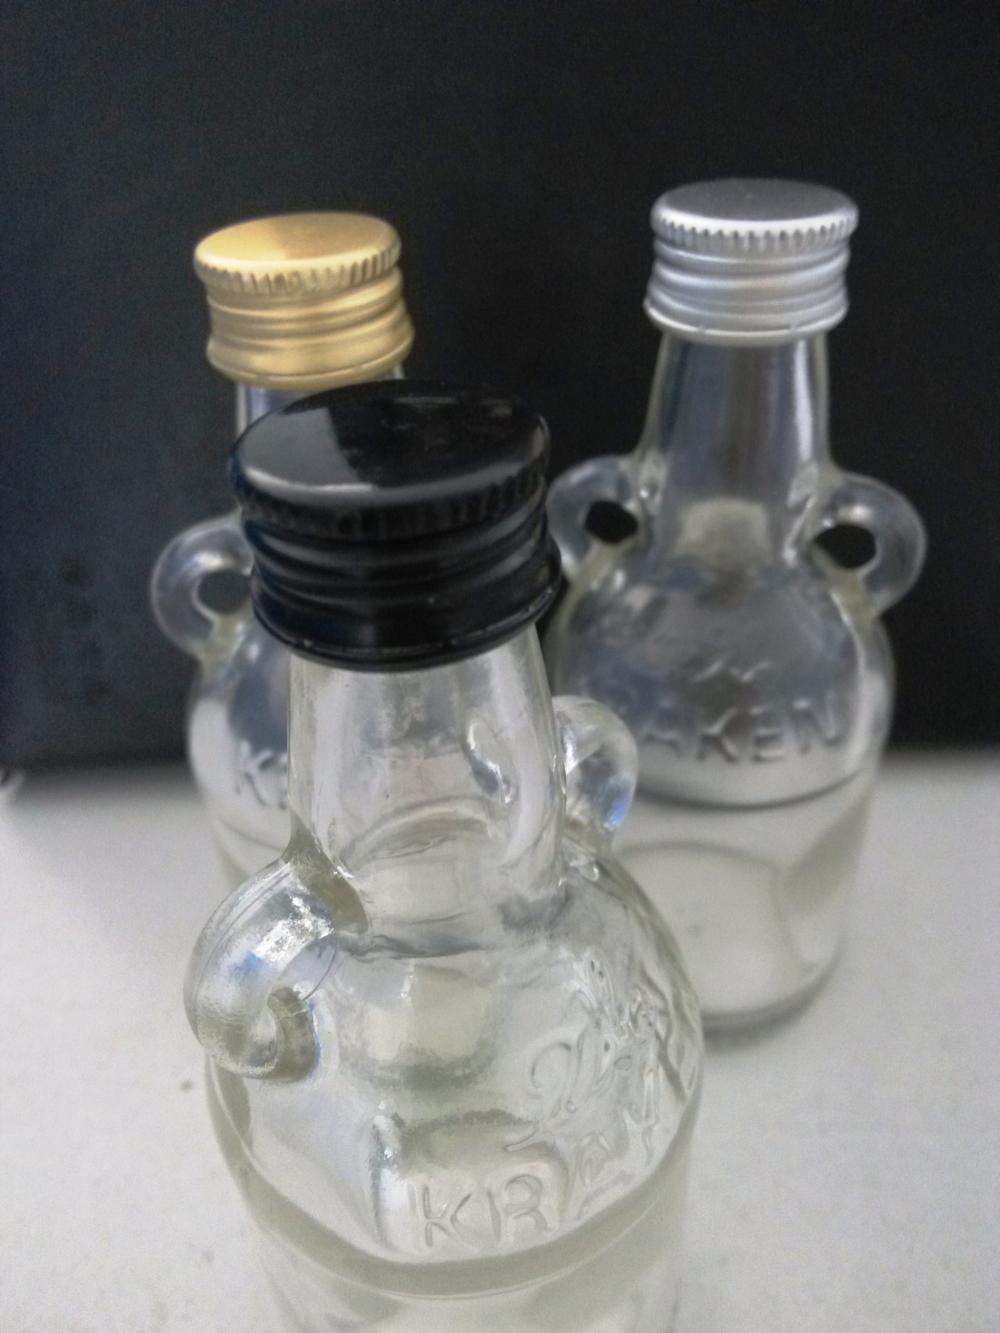 18x12mm Gin bottle capsules with liner